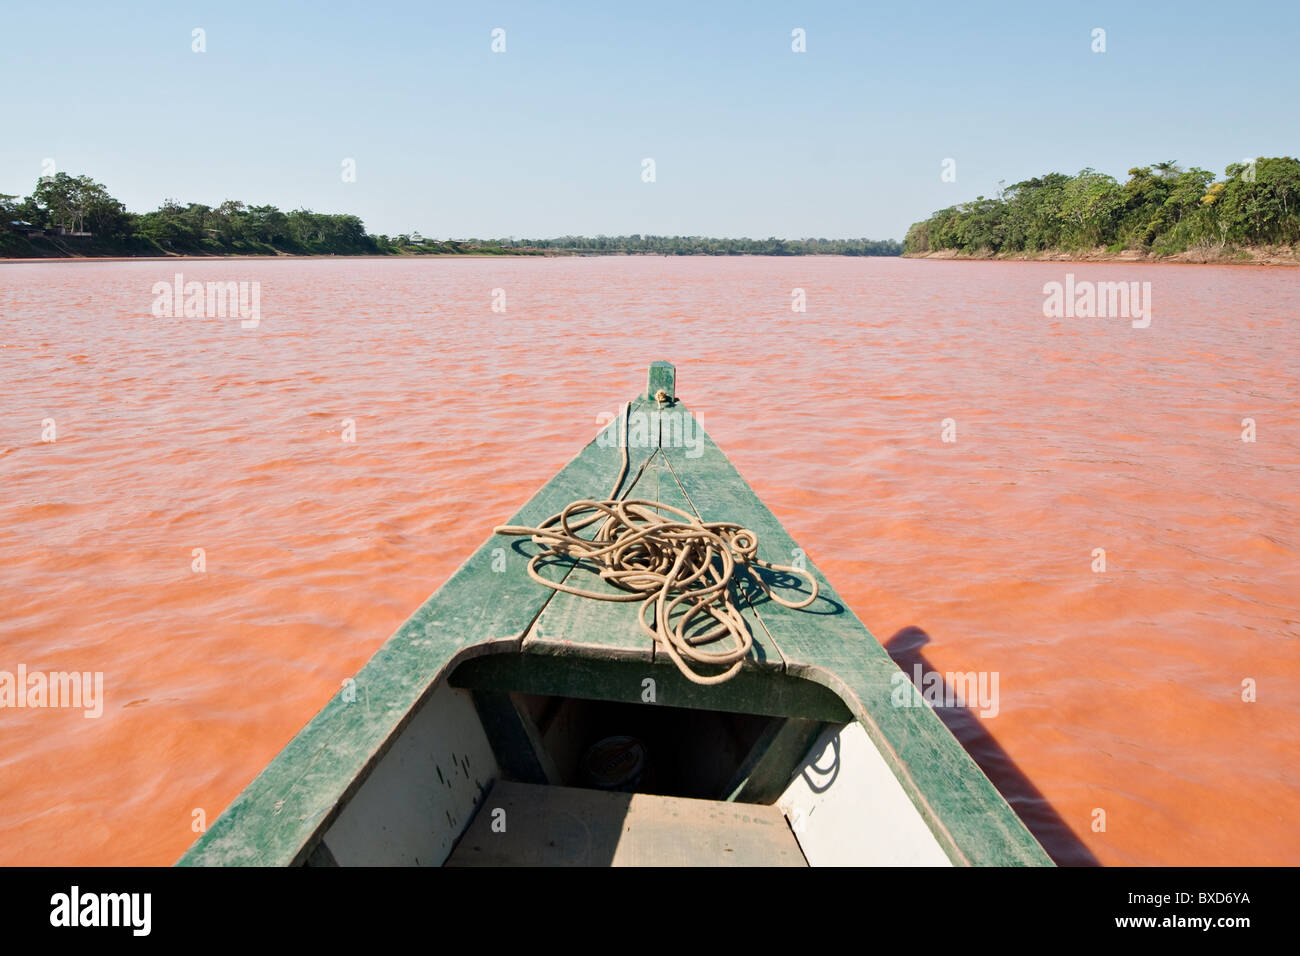 A wooden canoe made of Eucylptus tree floats in the amazon river and connecting tributary rivers in the rainforest. Stock Photo